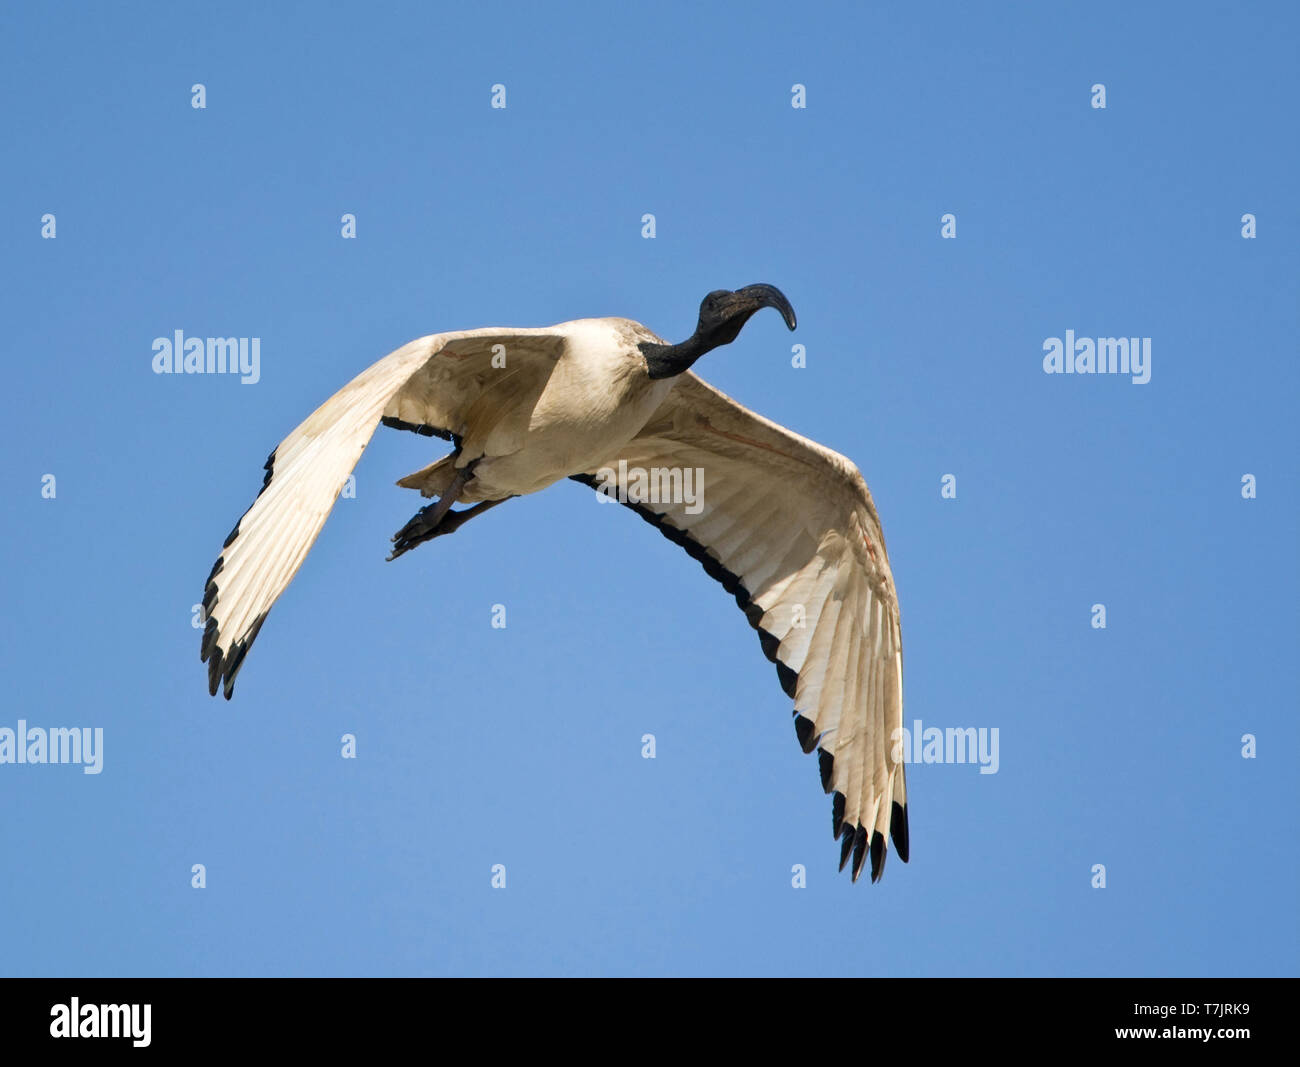 African Sacred Ibis (Threskiornis aethiopicus) in flight in South Africa, seen from the front. Flying against a blue sky as a background. Stock Photo